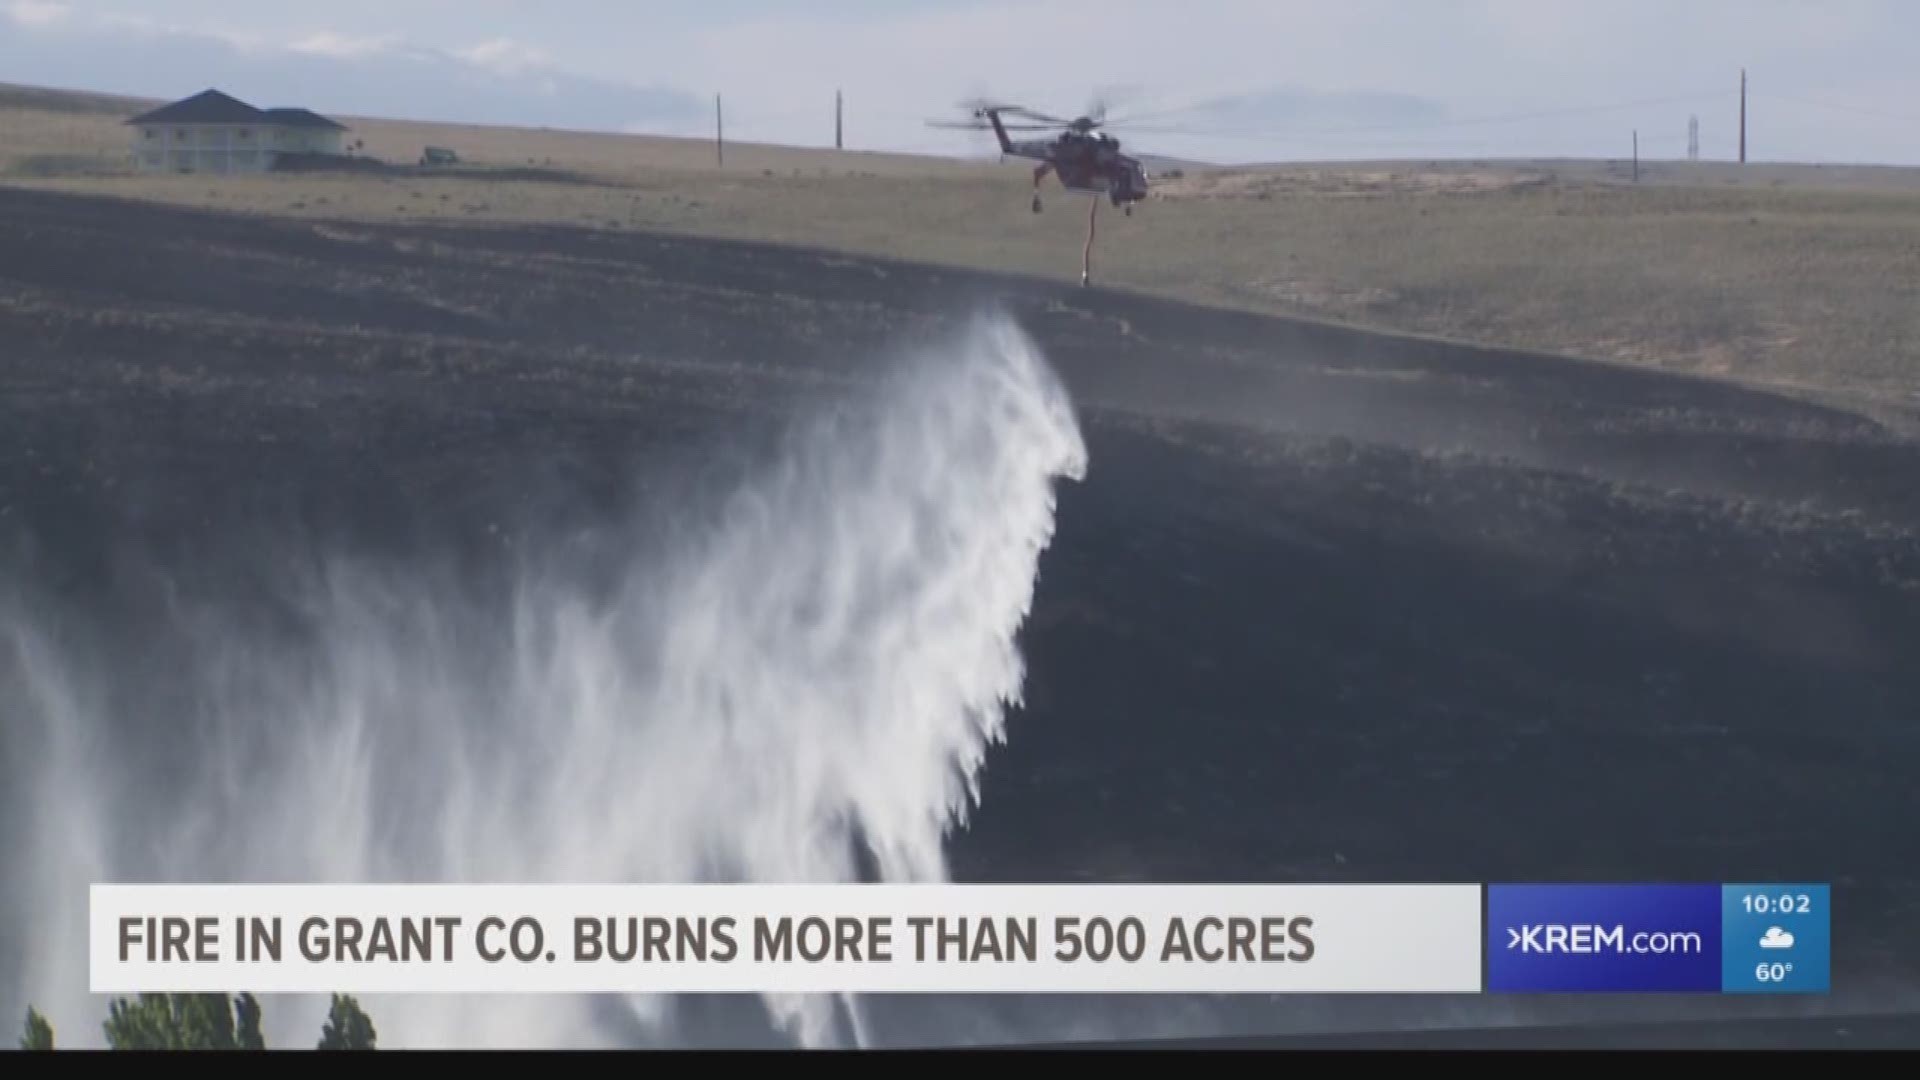 Fire in Grant County burns more than 5,000 acres (7-4-18)